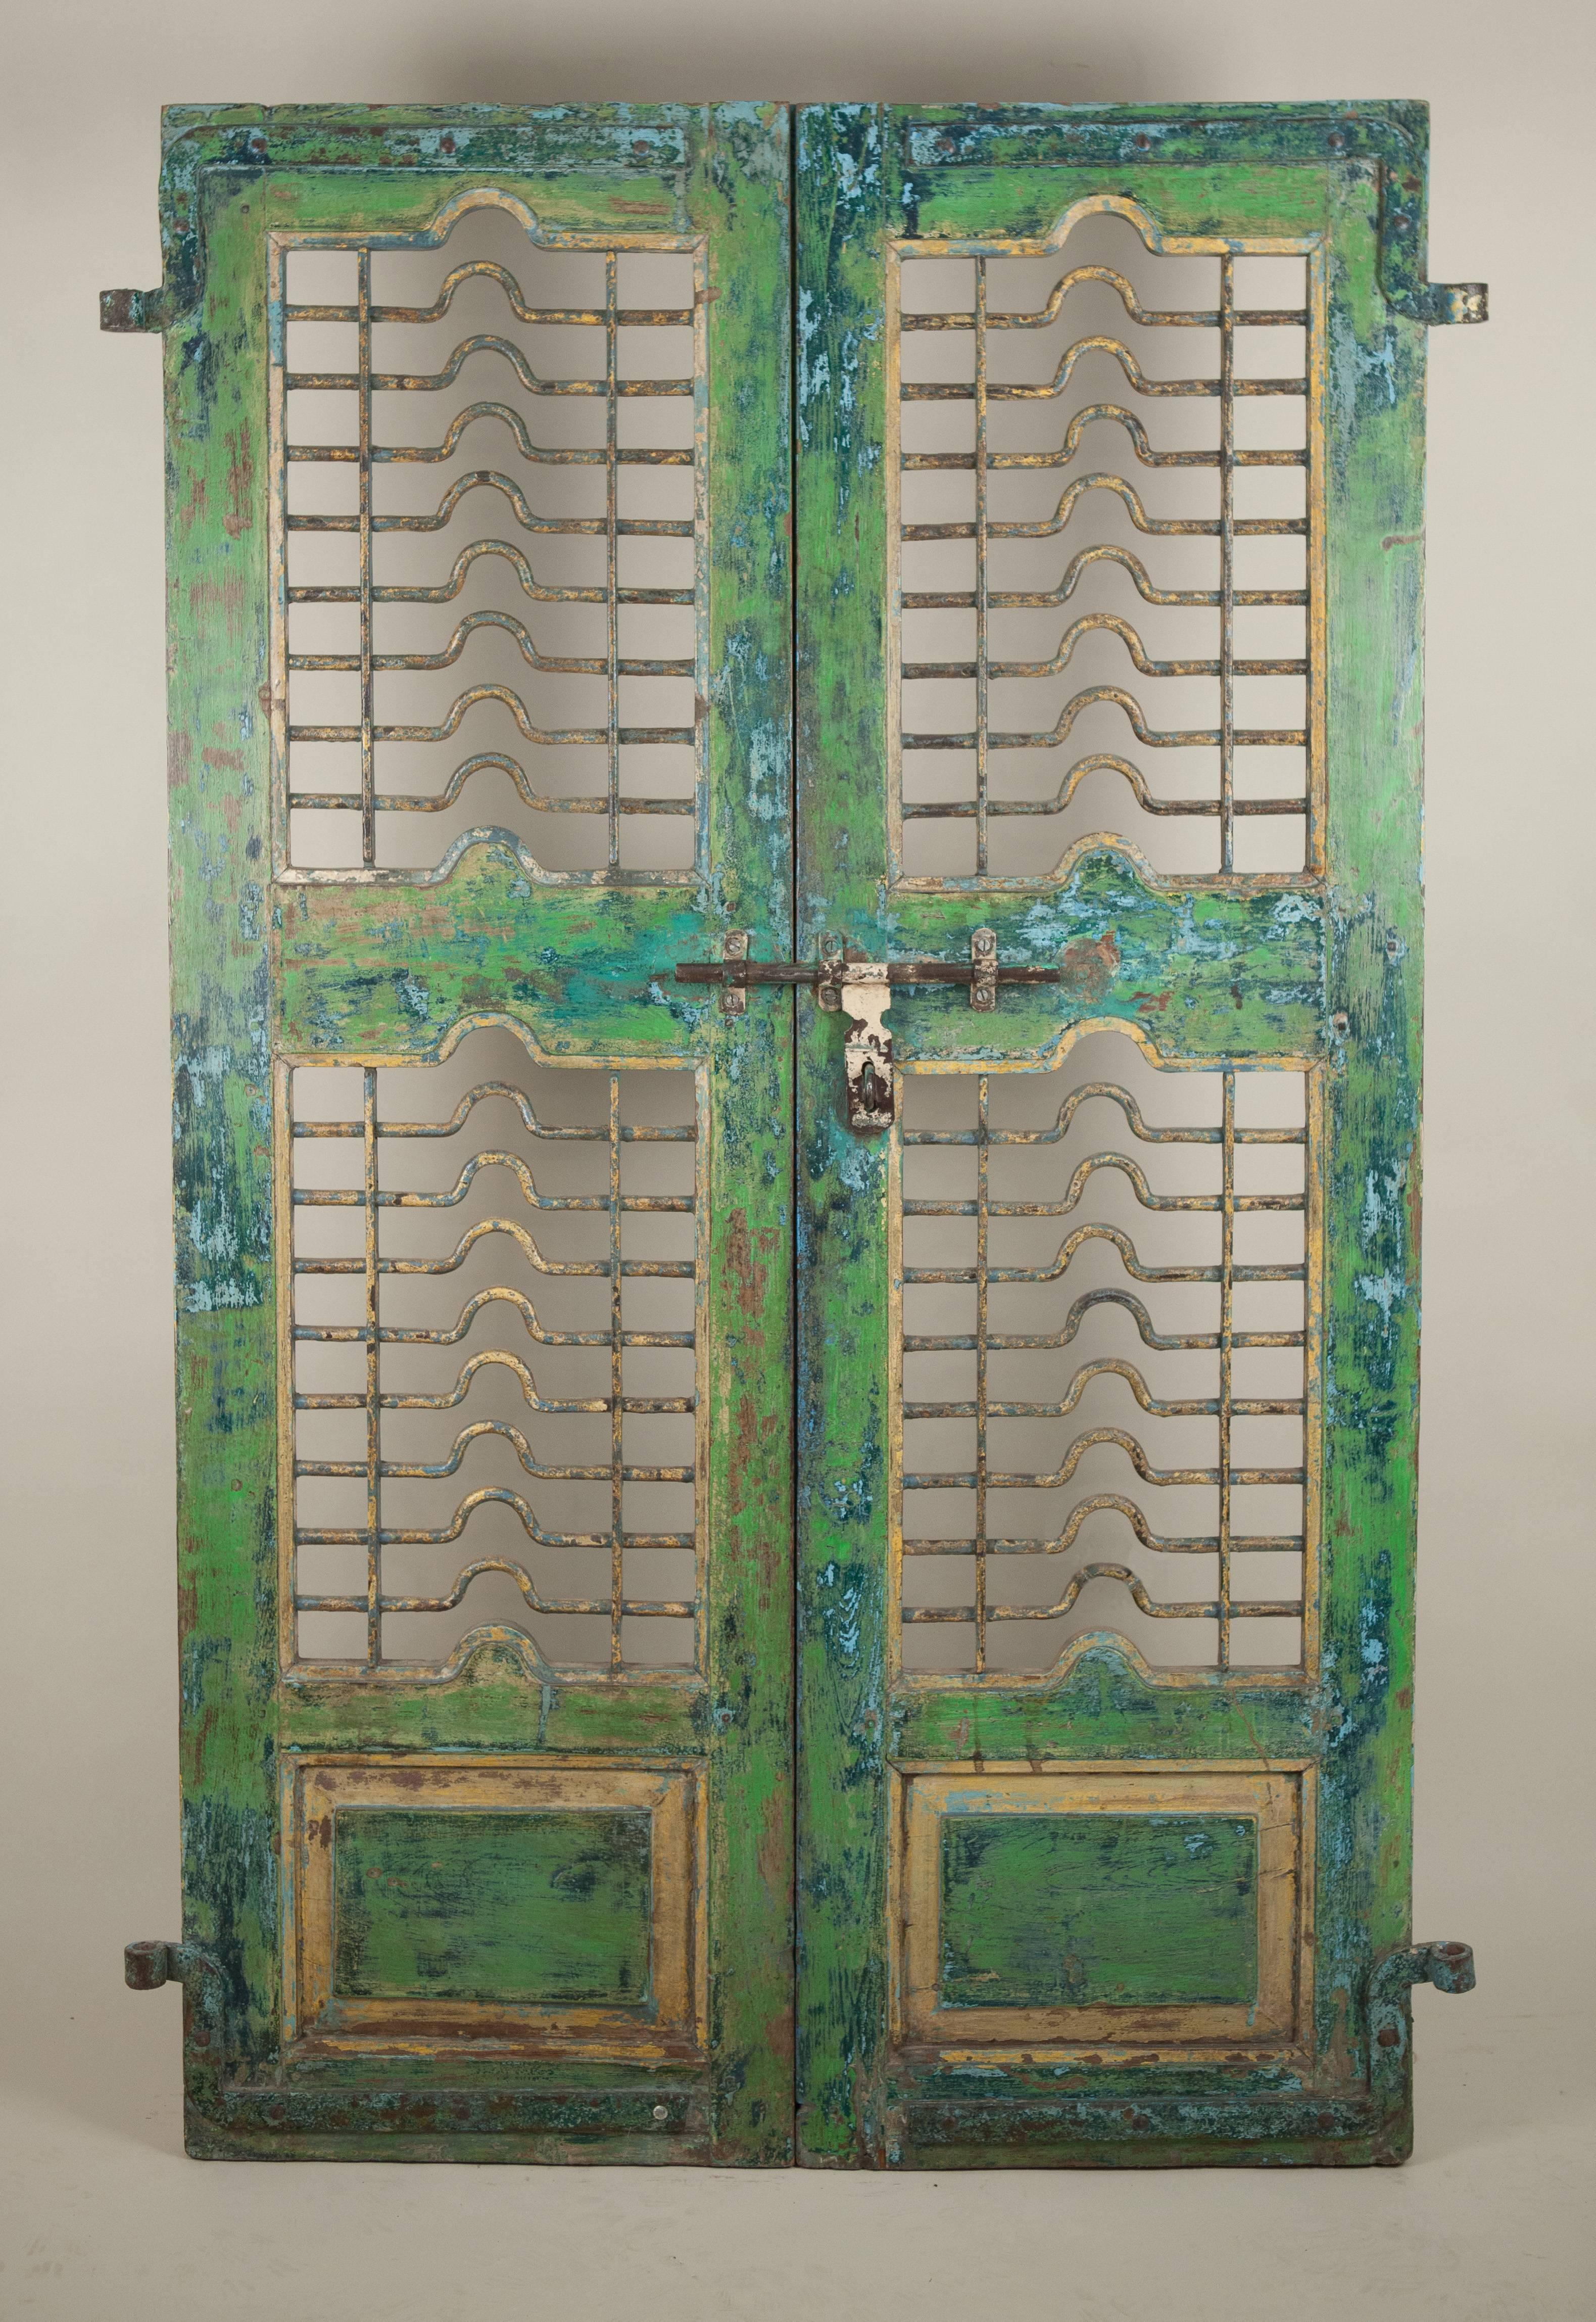 Colorful teak wood and iron door from Gujarat, India, circa 1900. This green-blue courtyard gate features original paint and hand forged ironwork, including a sliding lock on one side. Interior, terrace and landscape design possibilities abound.